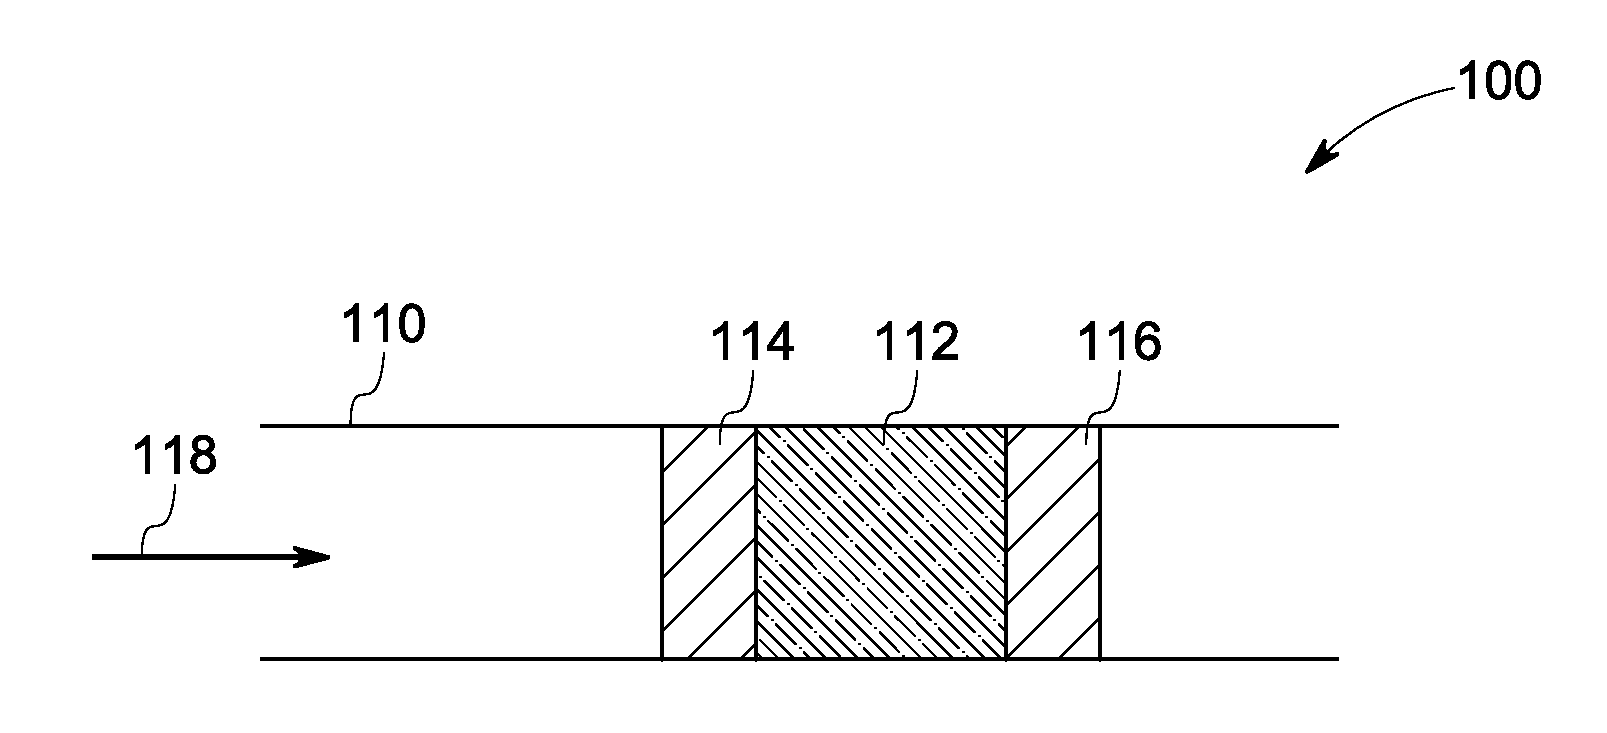 Catalyst and method of manufacture